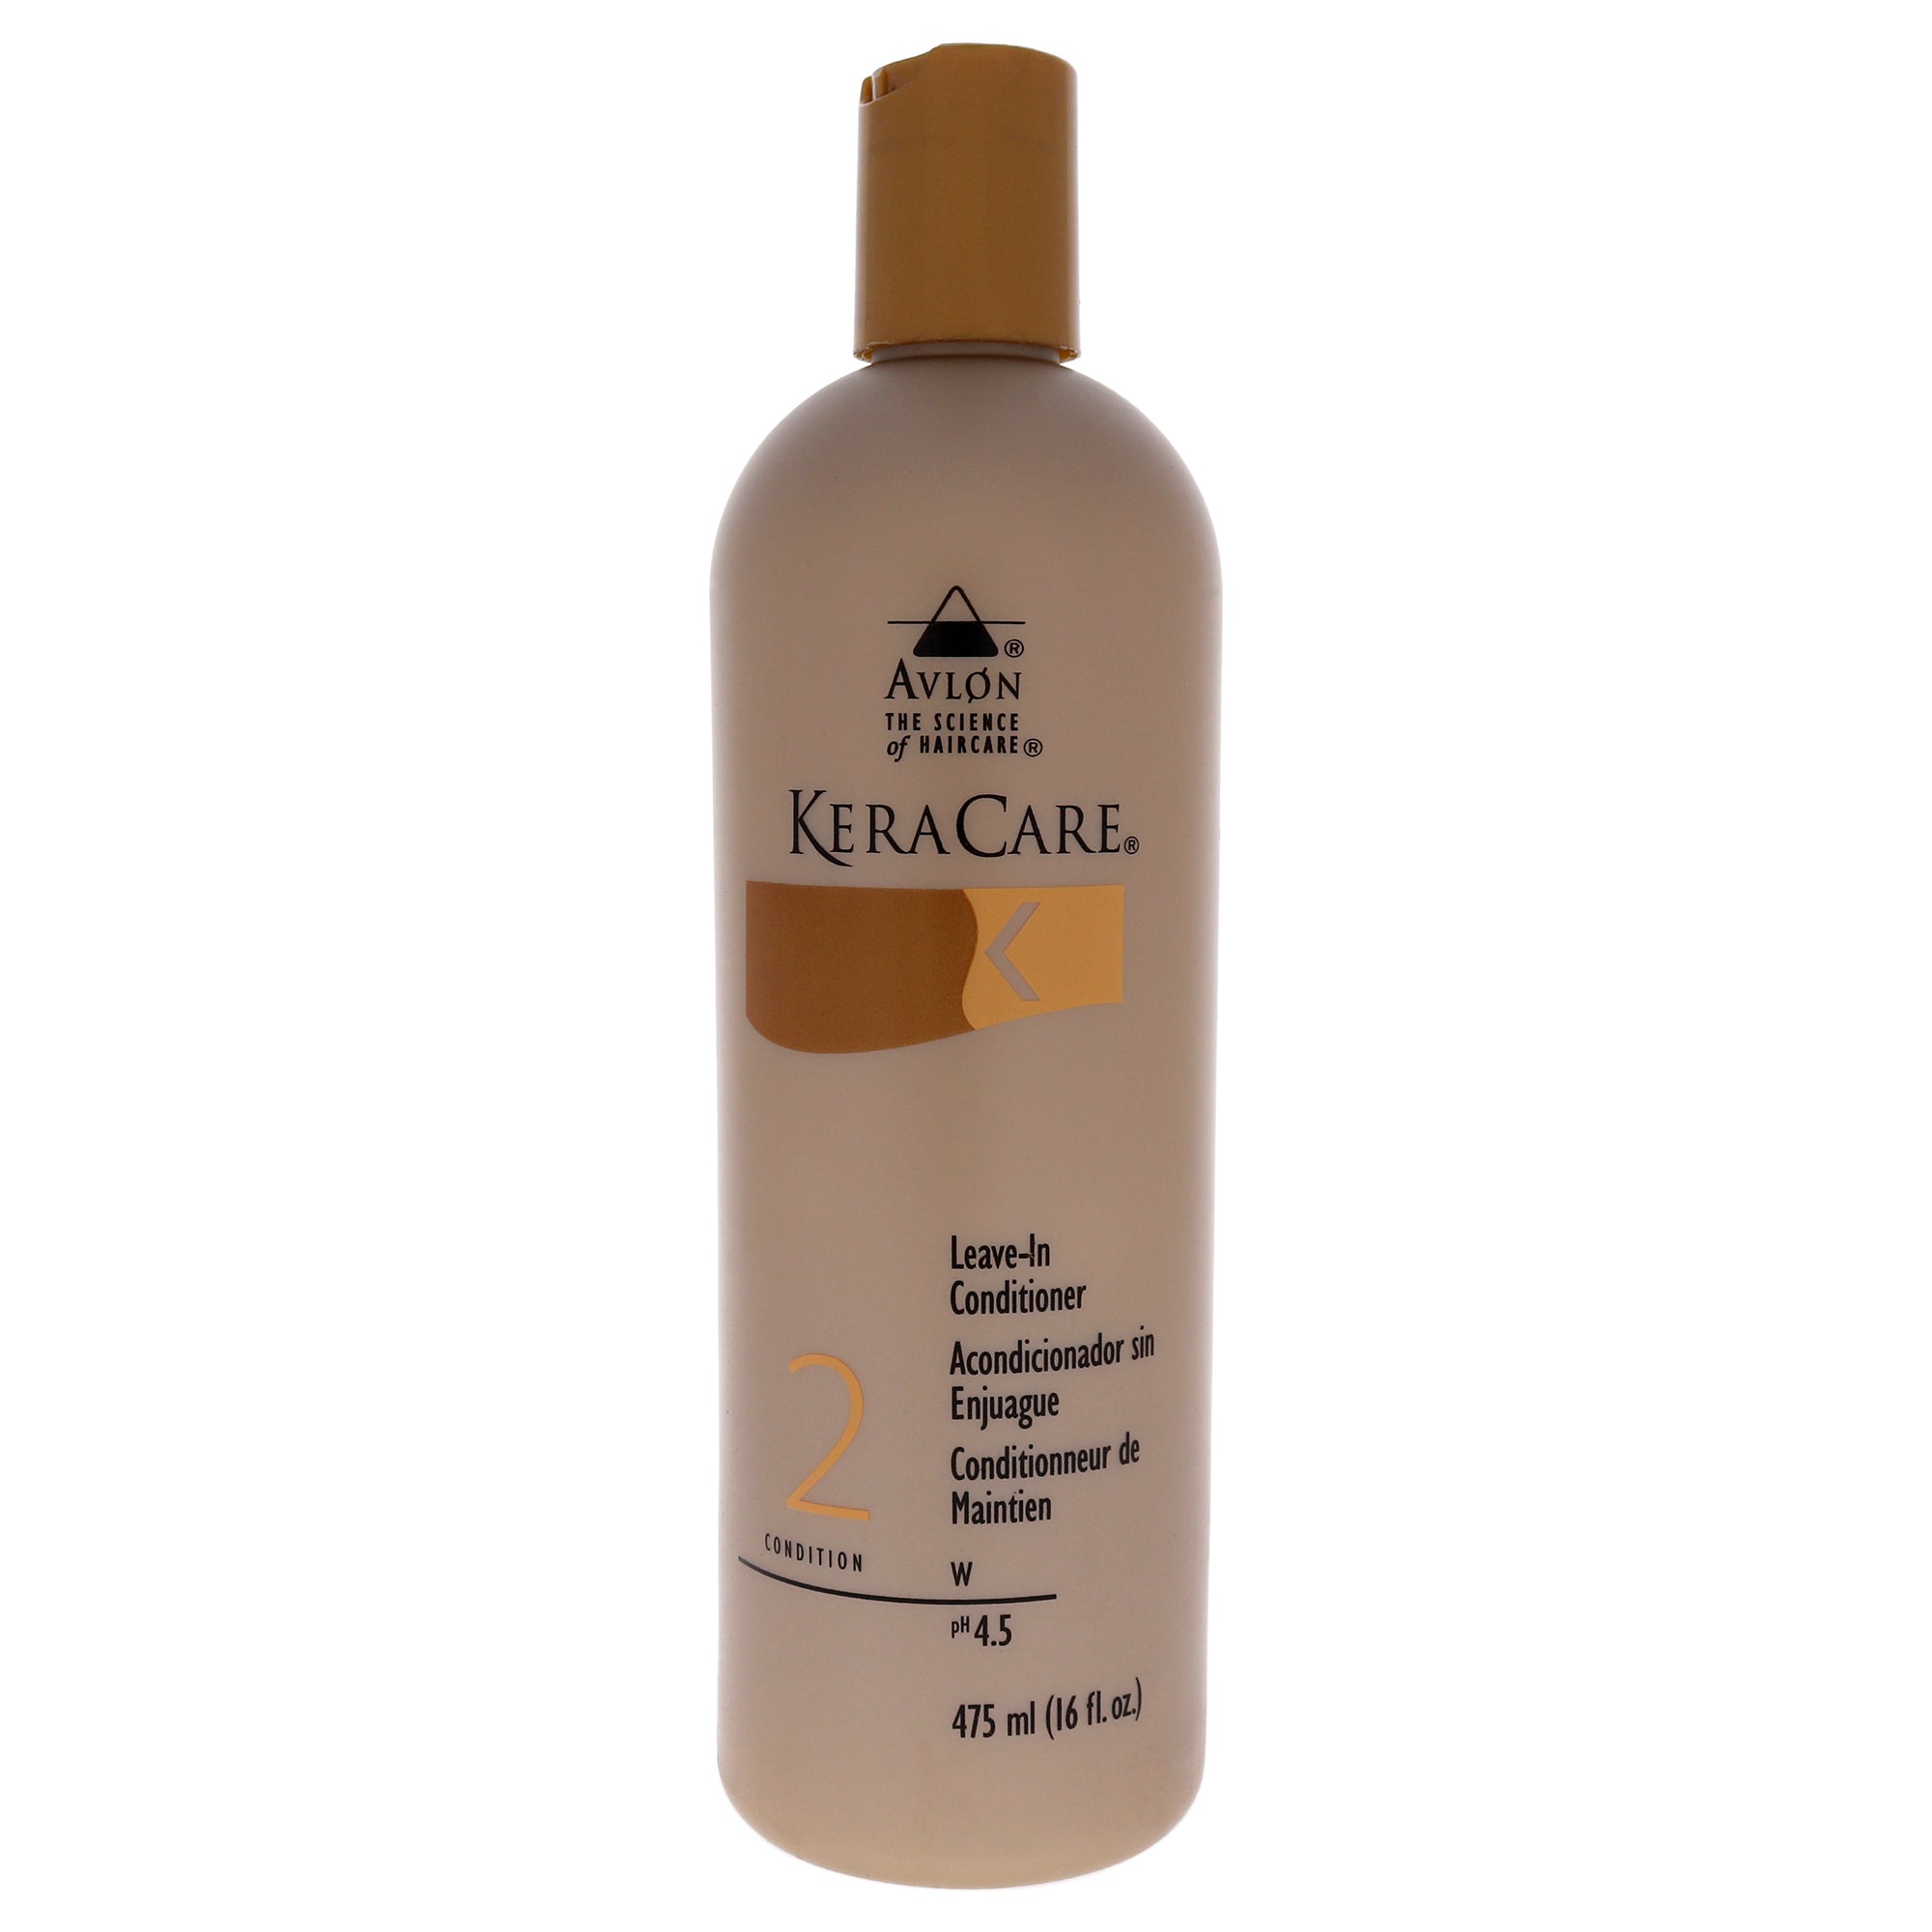 KeraCare Leave-In Conditioner by Avlon for Unisex - 16 oz Conditioner